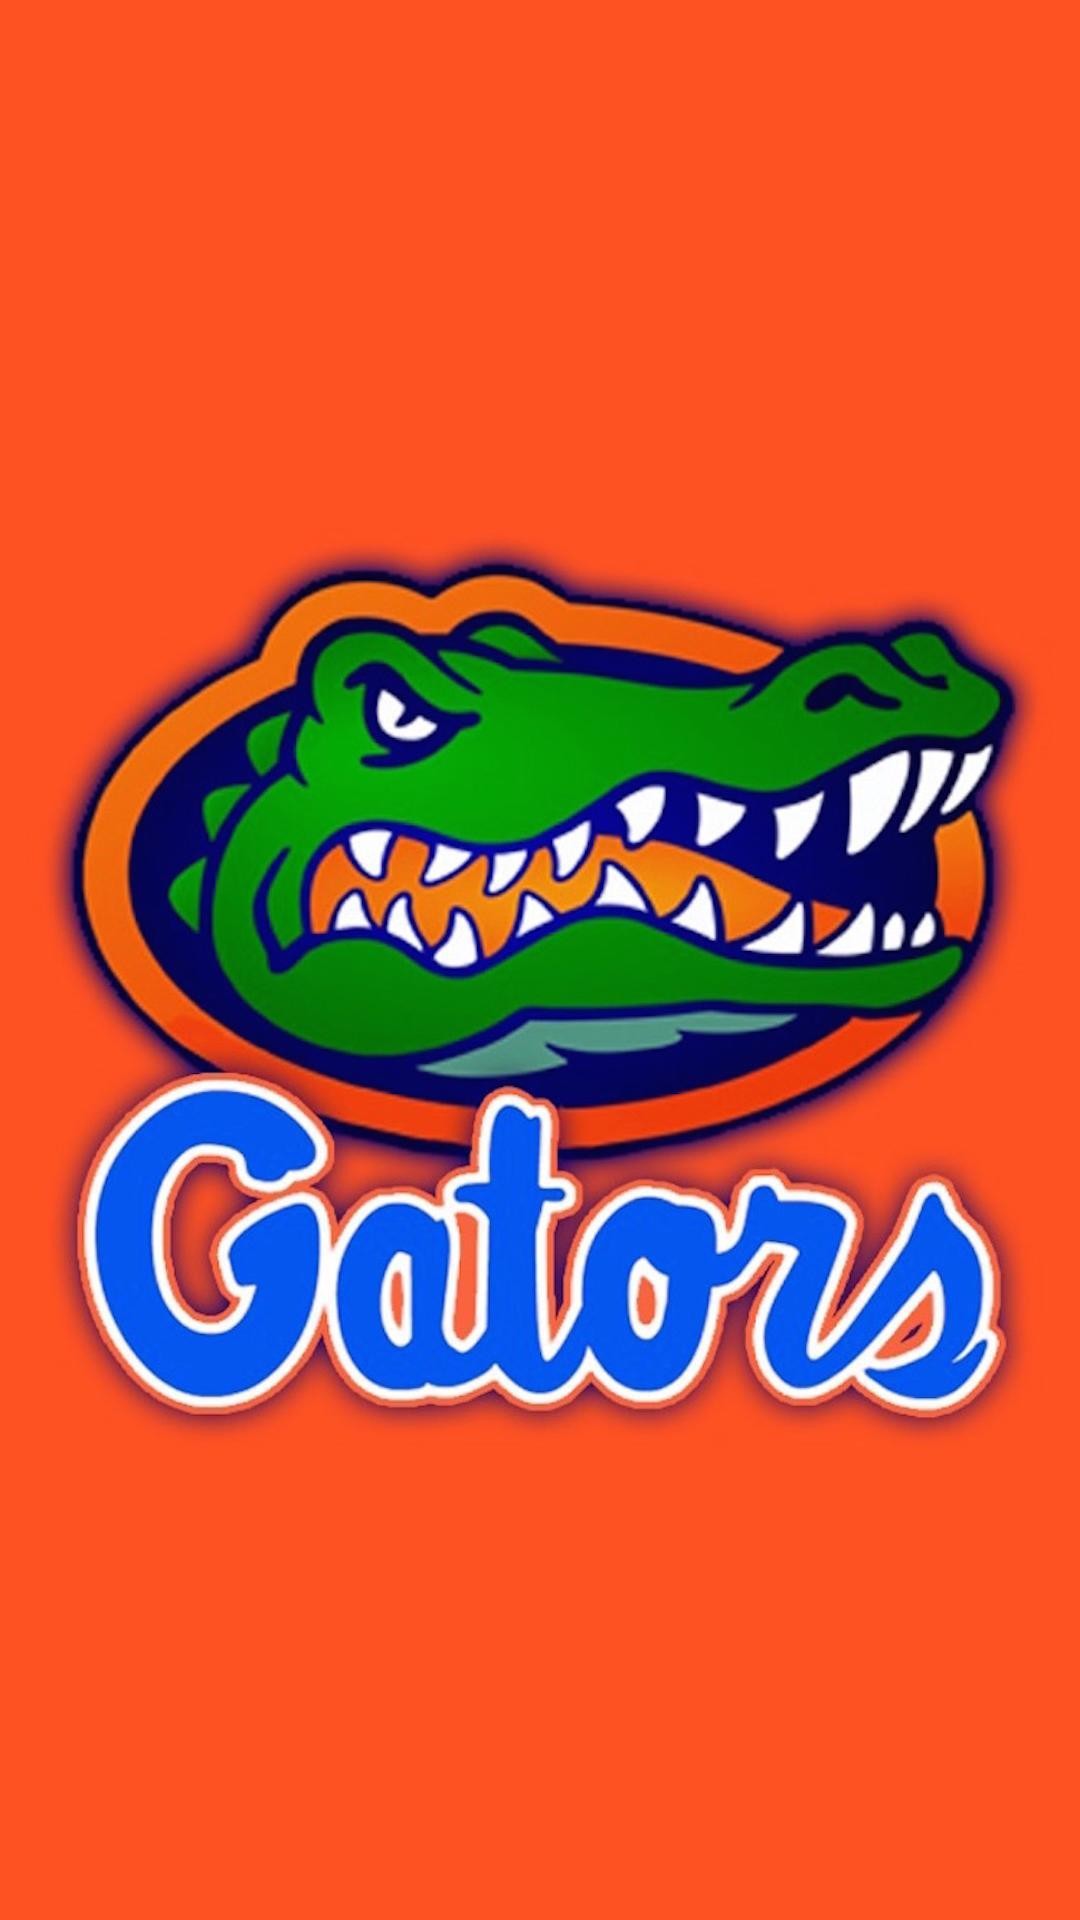 1080x1920 Florida Gators Iphone Wallpapers Install In Seconds 21 To